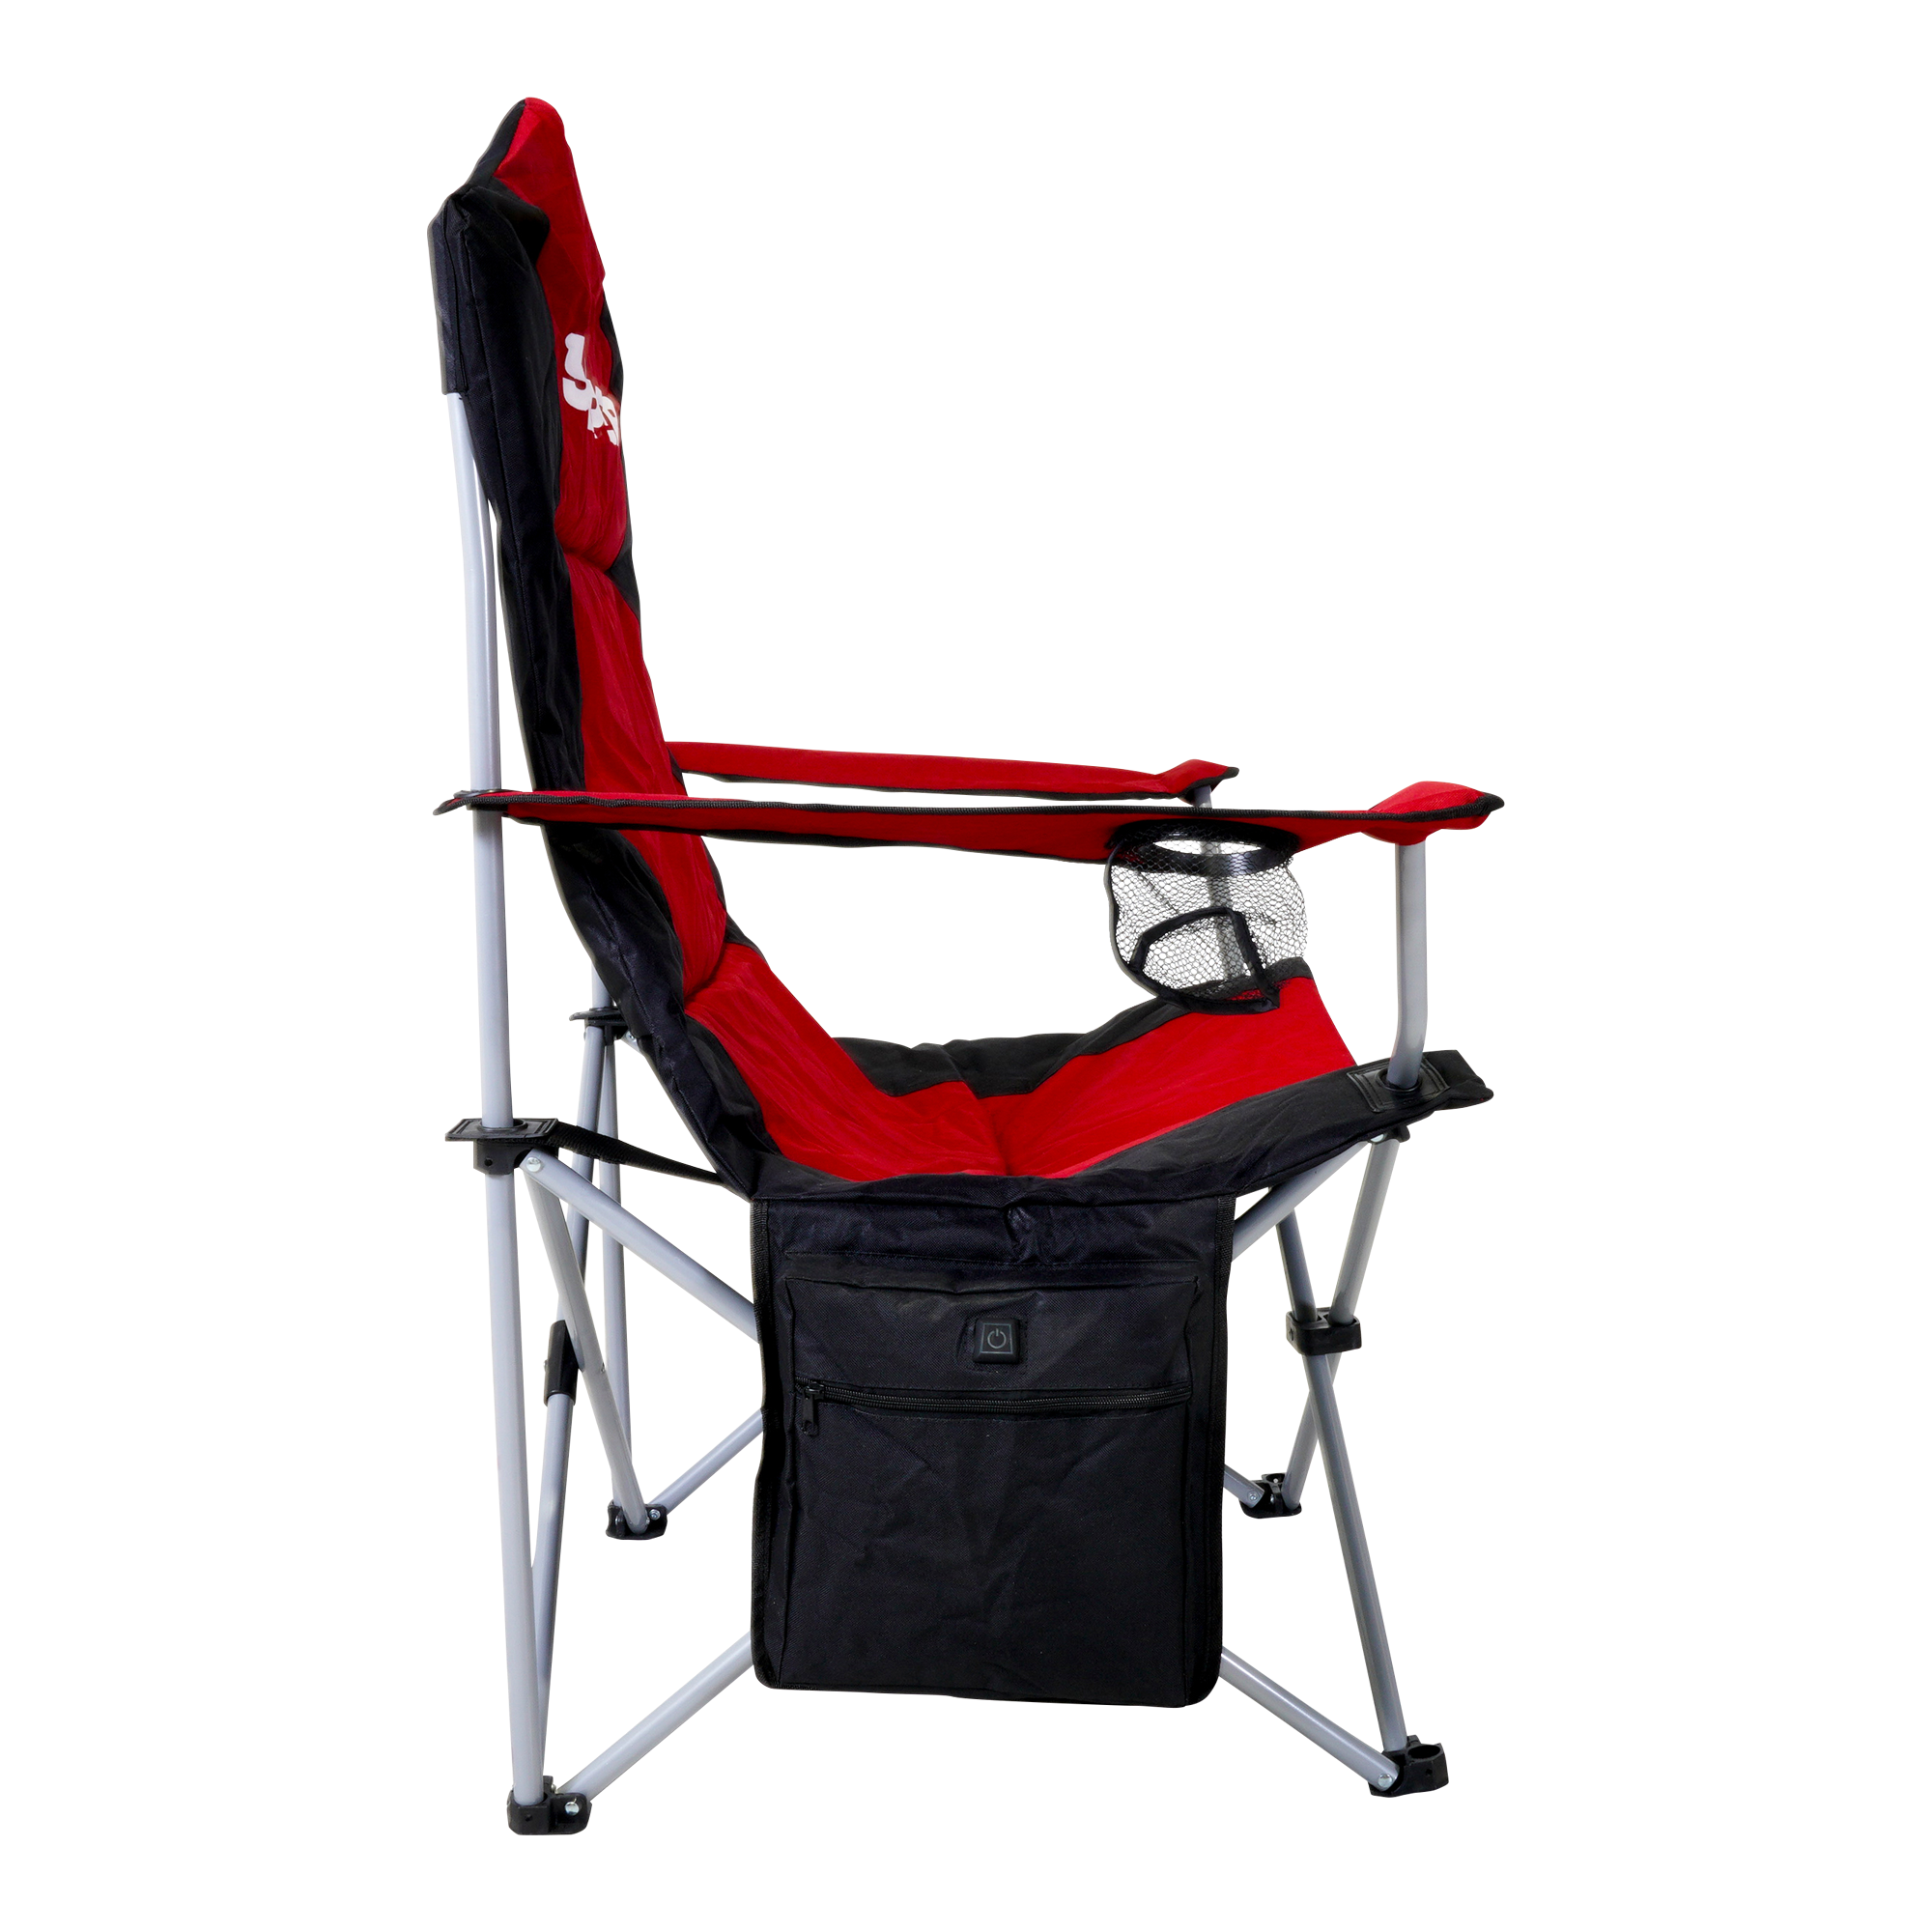 Heated Camp Chair Kit With Power Bank Snapper Australia